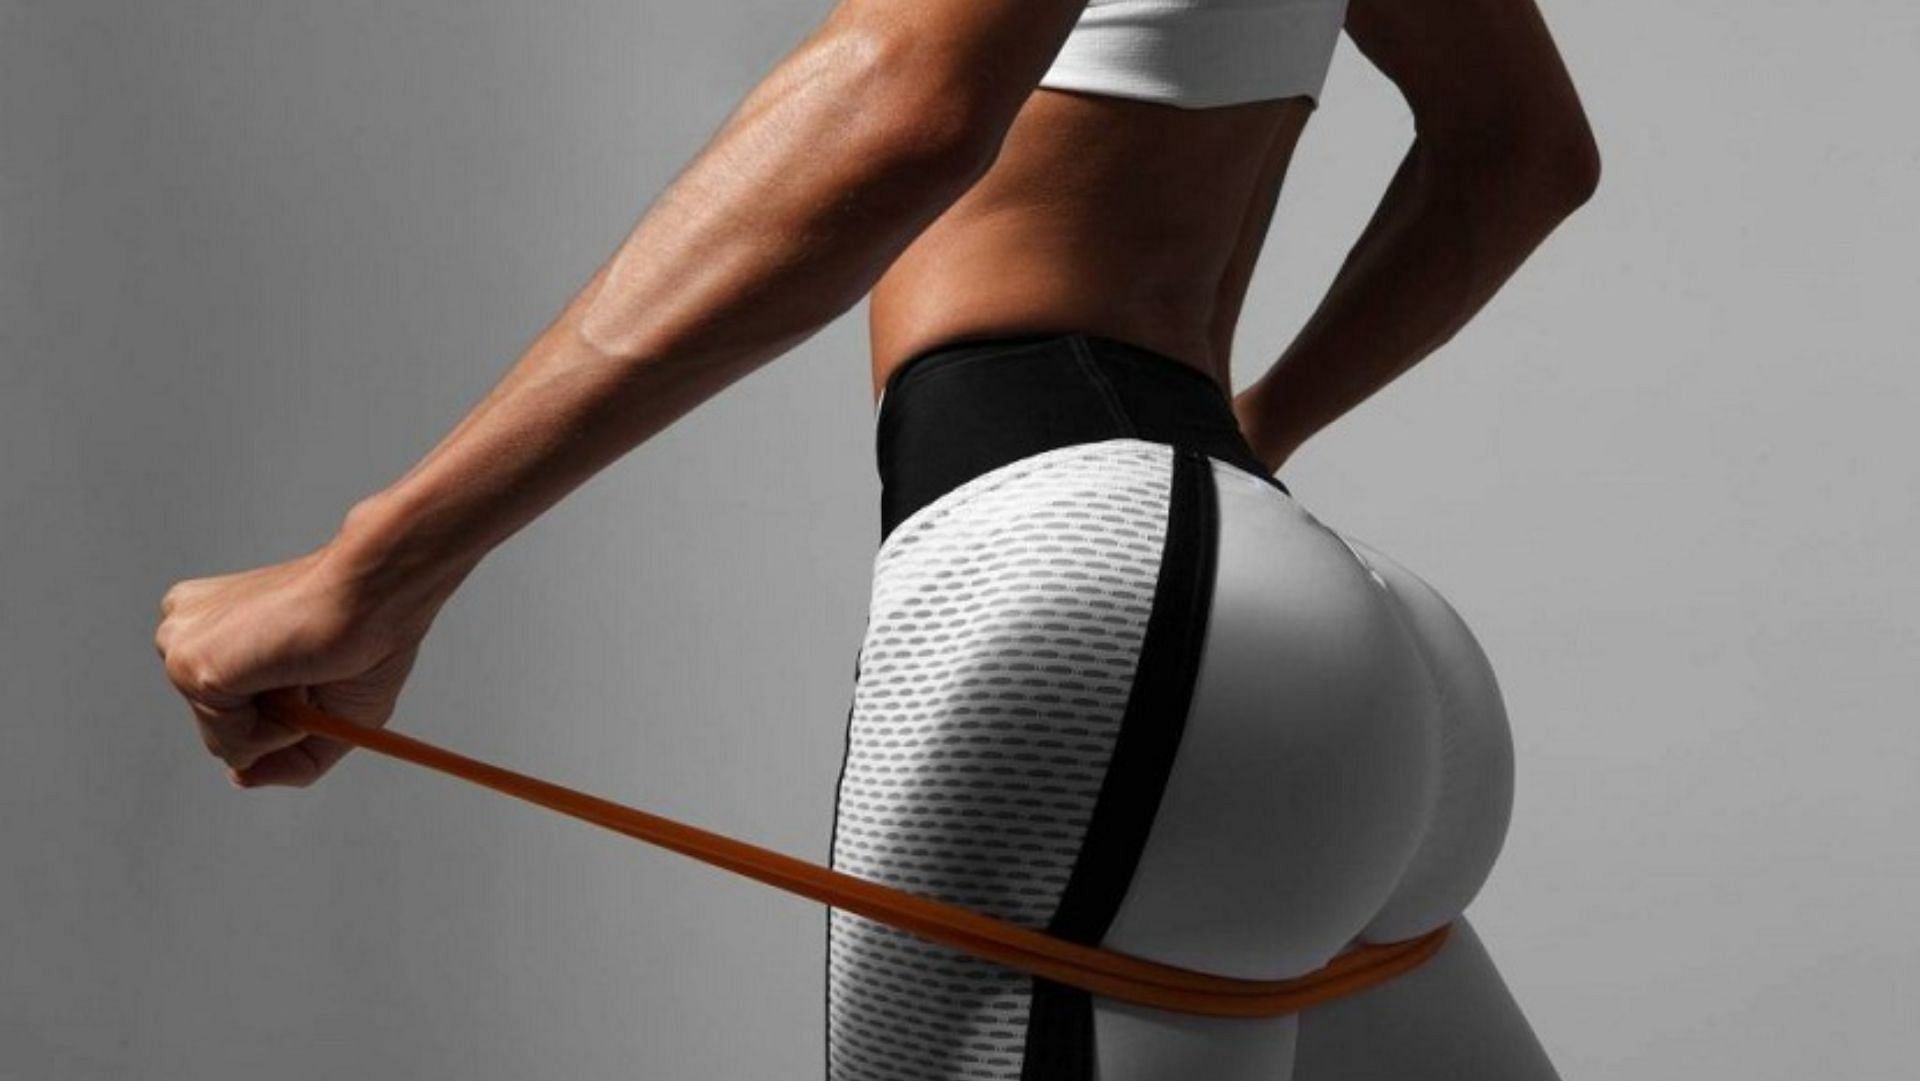 Hip thrusts are excellent for women looking to grow their glutes. (Image via Flickr)